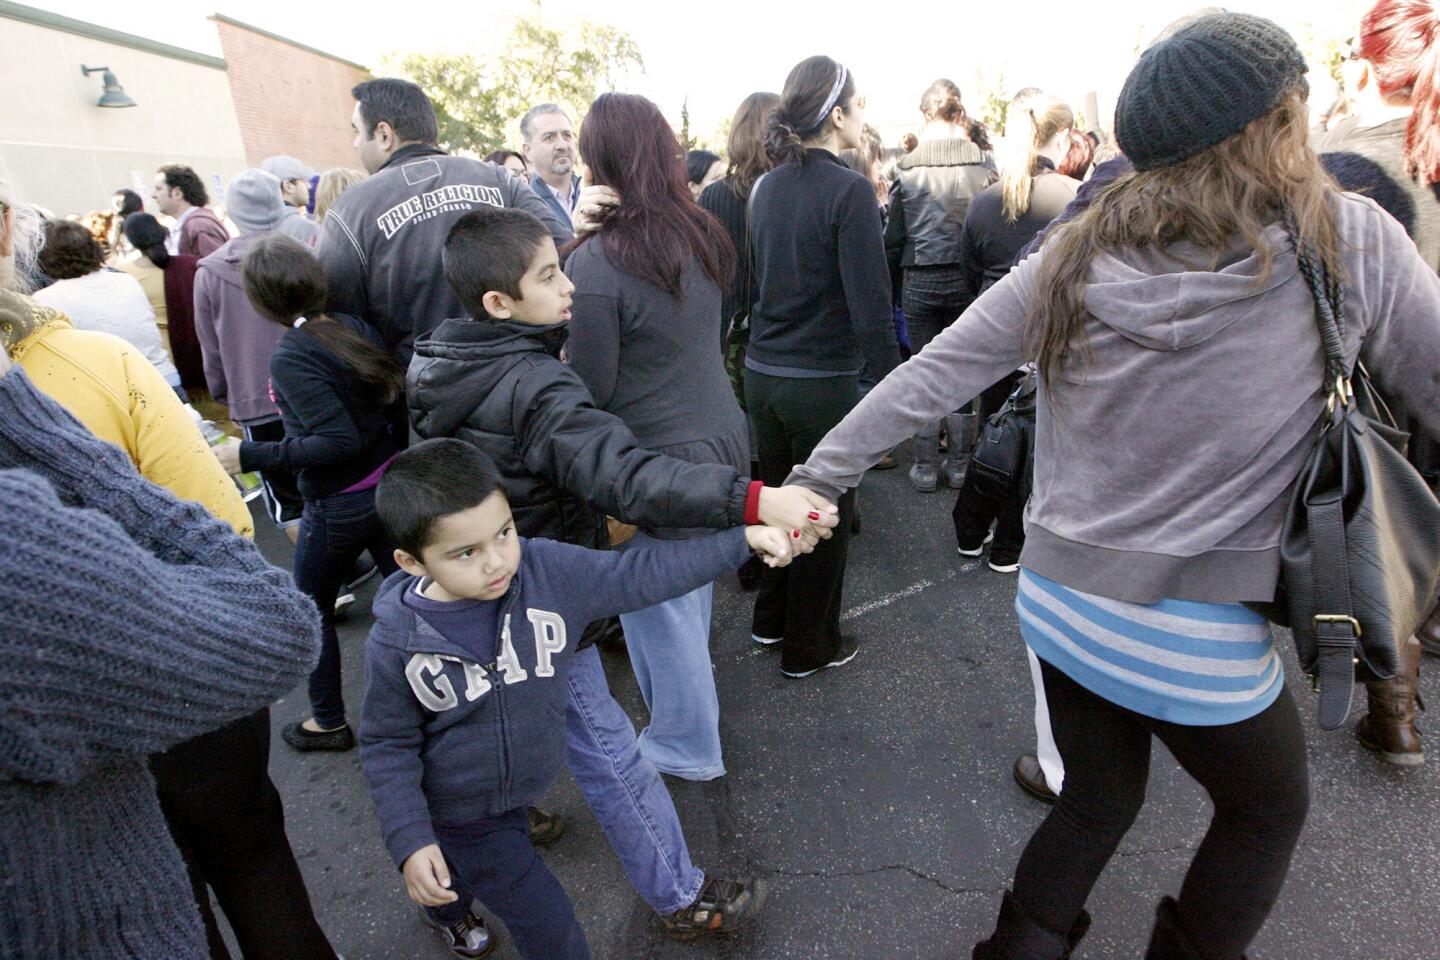 A parent leads her children away from an pickup area after R.D White Elementary School was evacuated due to a bomb threat on Monday, January 7, 2013.